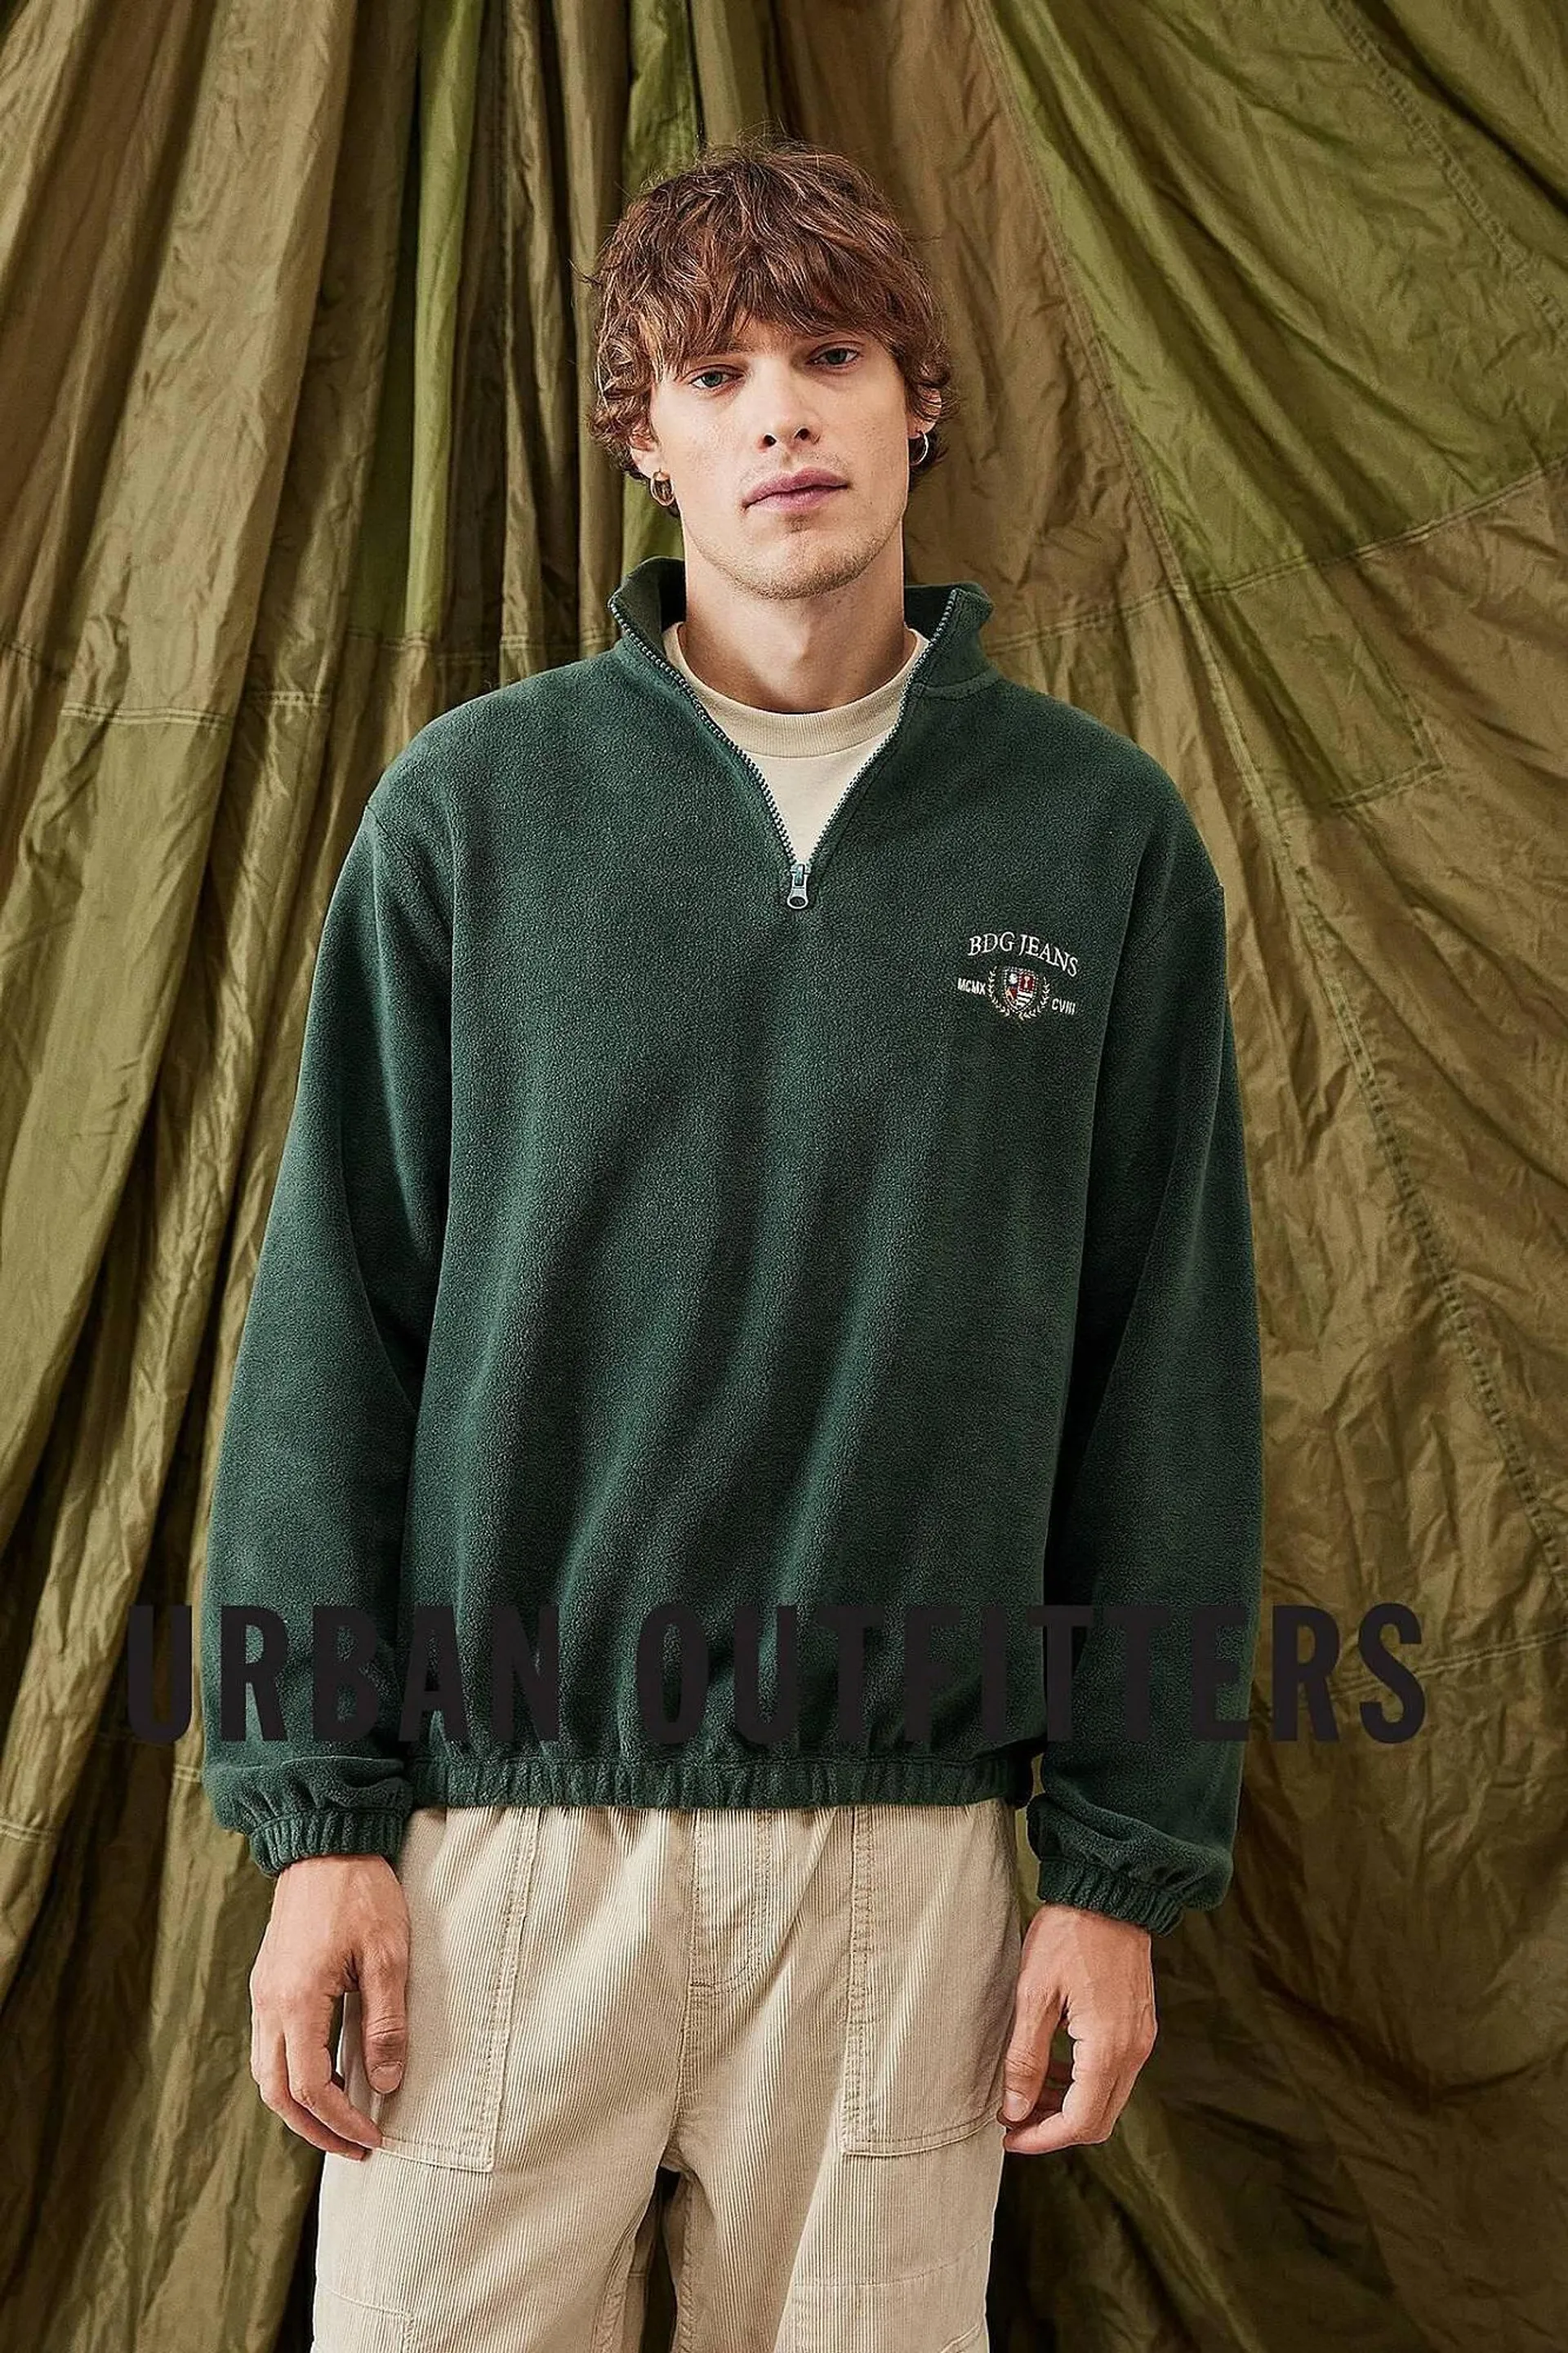 Urban Outfitters reklamblad - 1